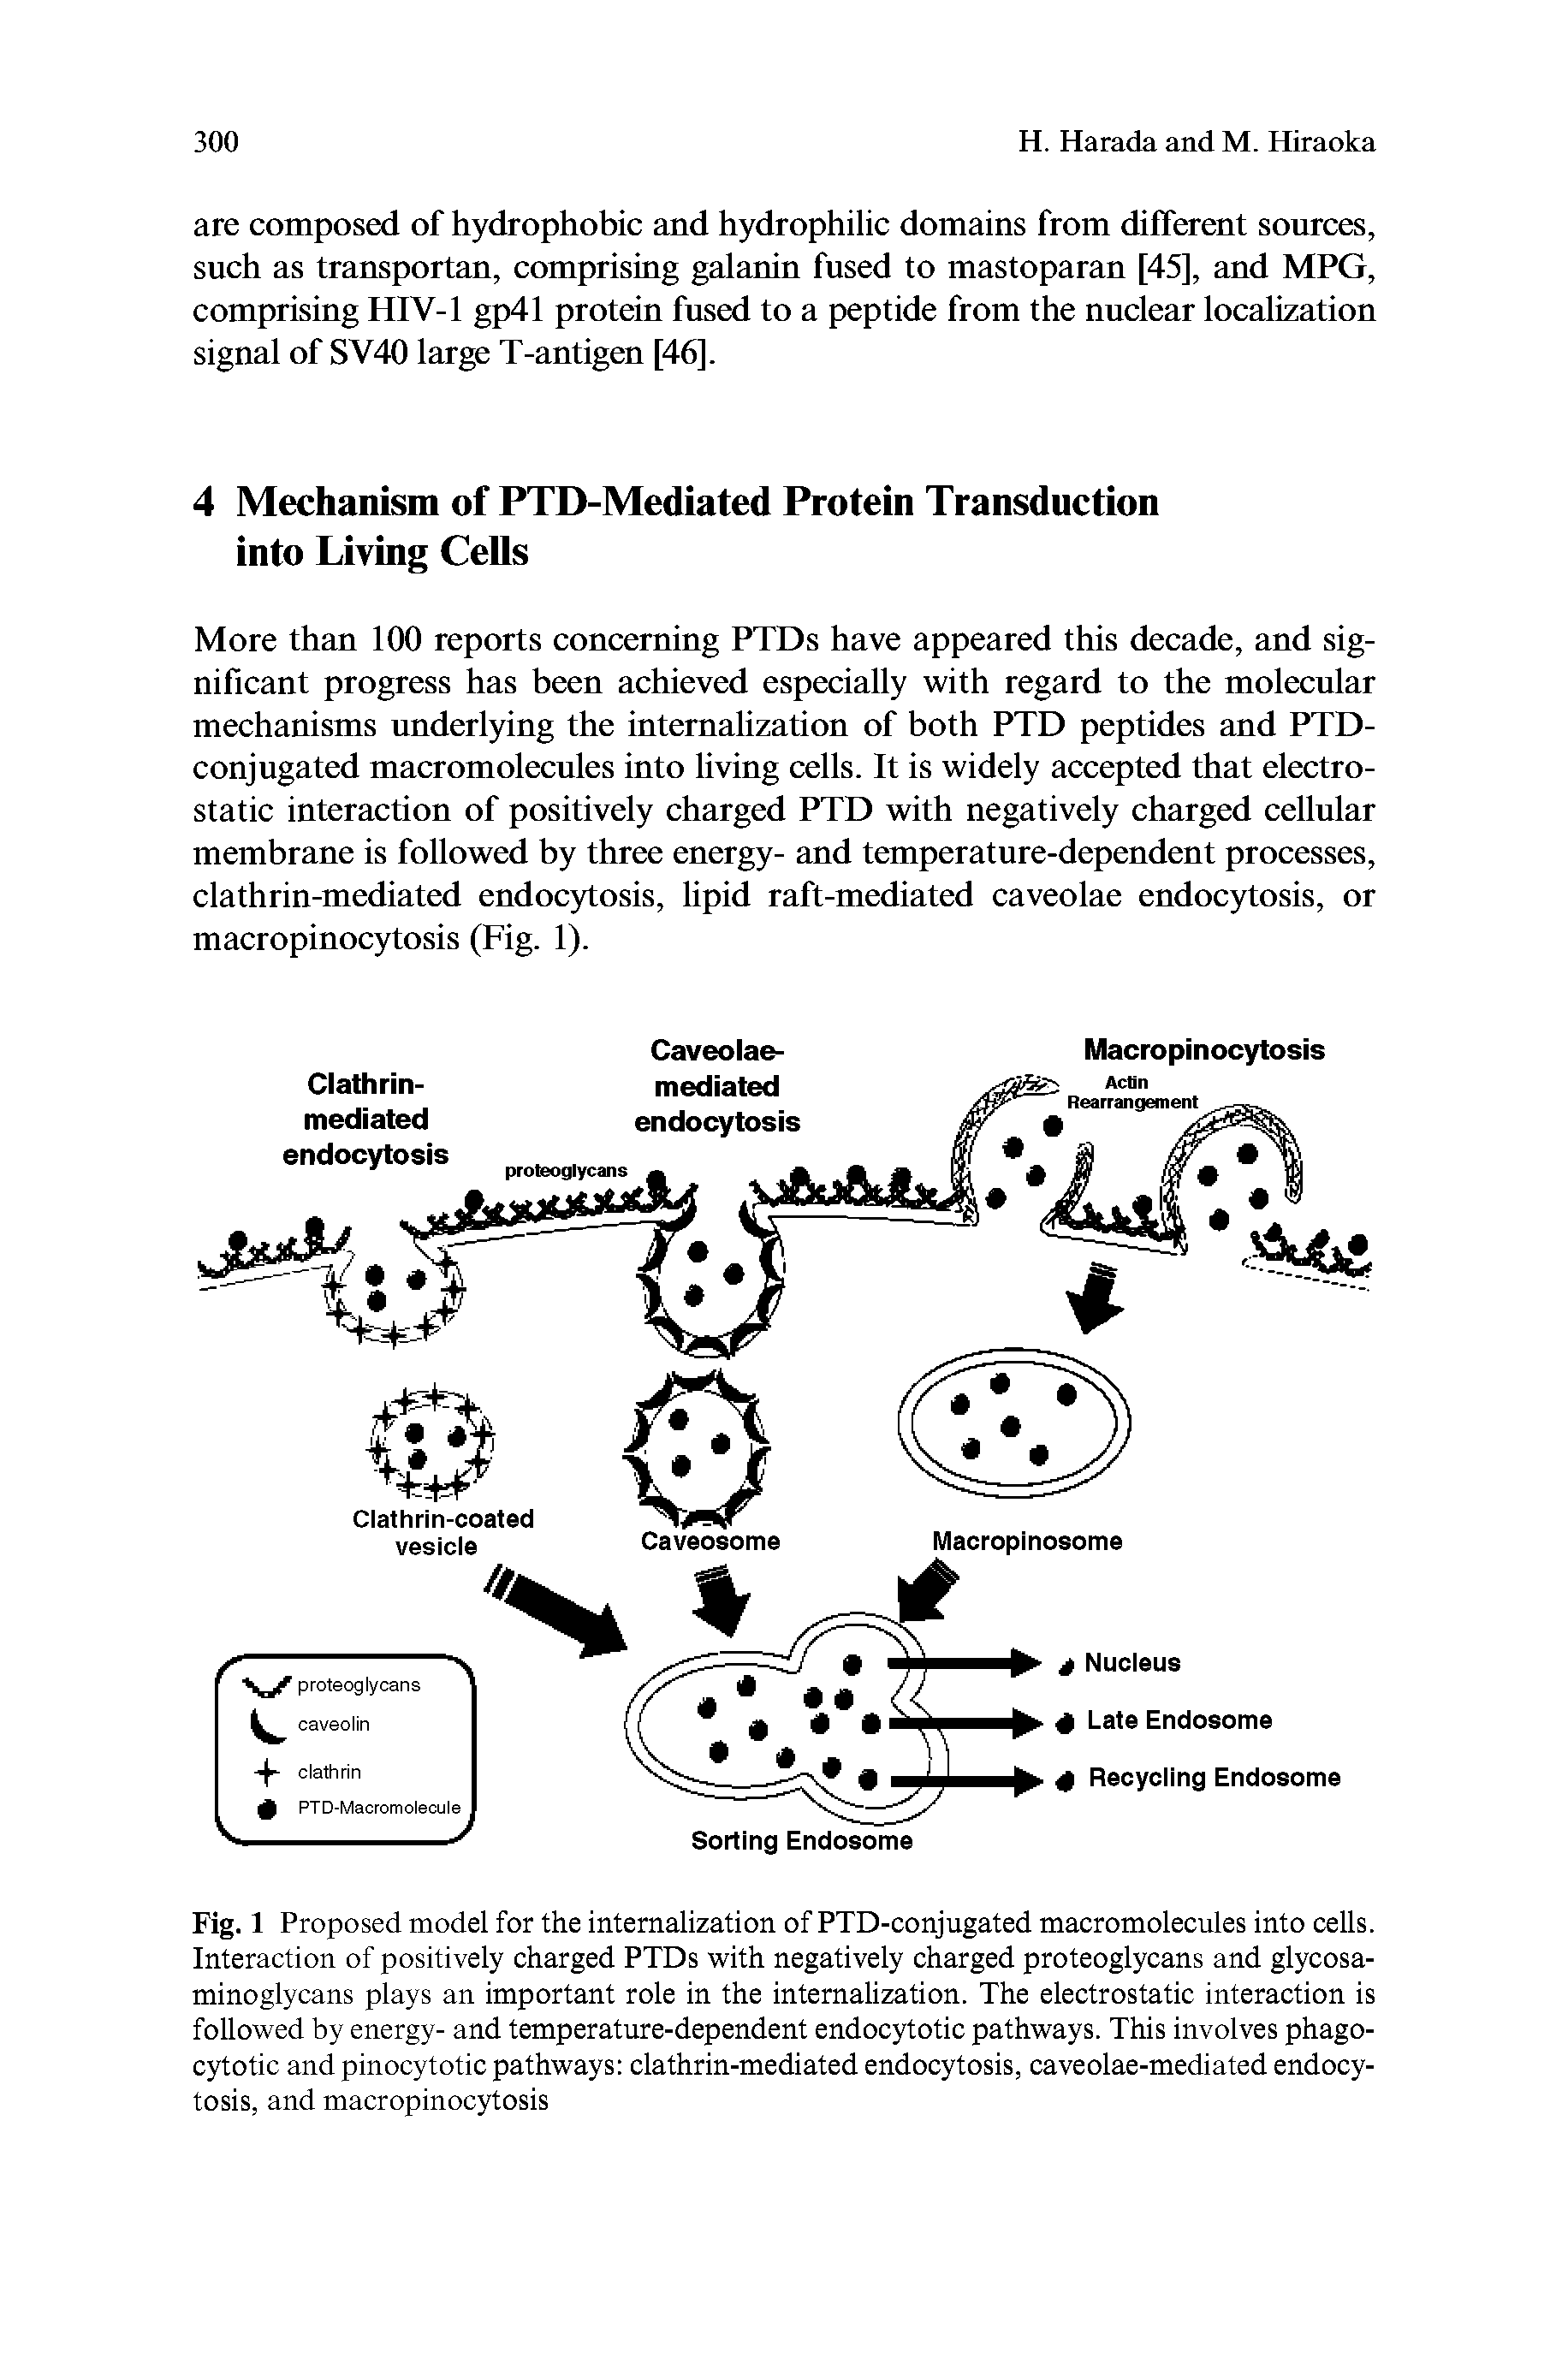 Fig. 1 Proposed model for the internalization of PTD-conjugated macromolecules into cells. Interaction of positively charged PTDs with negatively charged proteoglycans and glycosa-minoglycans plays an important role in the internalization. The electrostatic interaction is followed by energy- and temperature-dependent endocytotic pathways. This involves phago-cytotic and pinocytotic pathways clathrin-mediated endocytosis, caveolae-mediated endocytosis, and macropinocytosis...